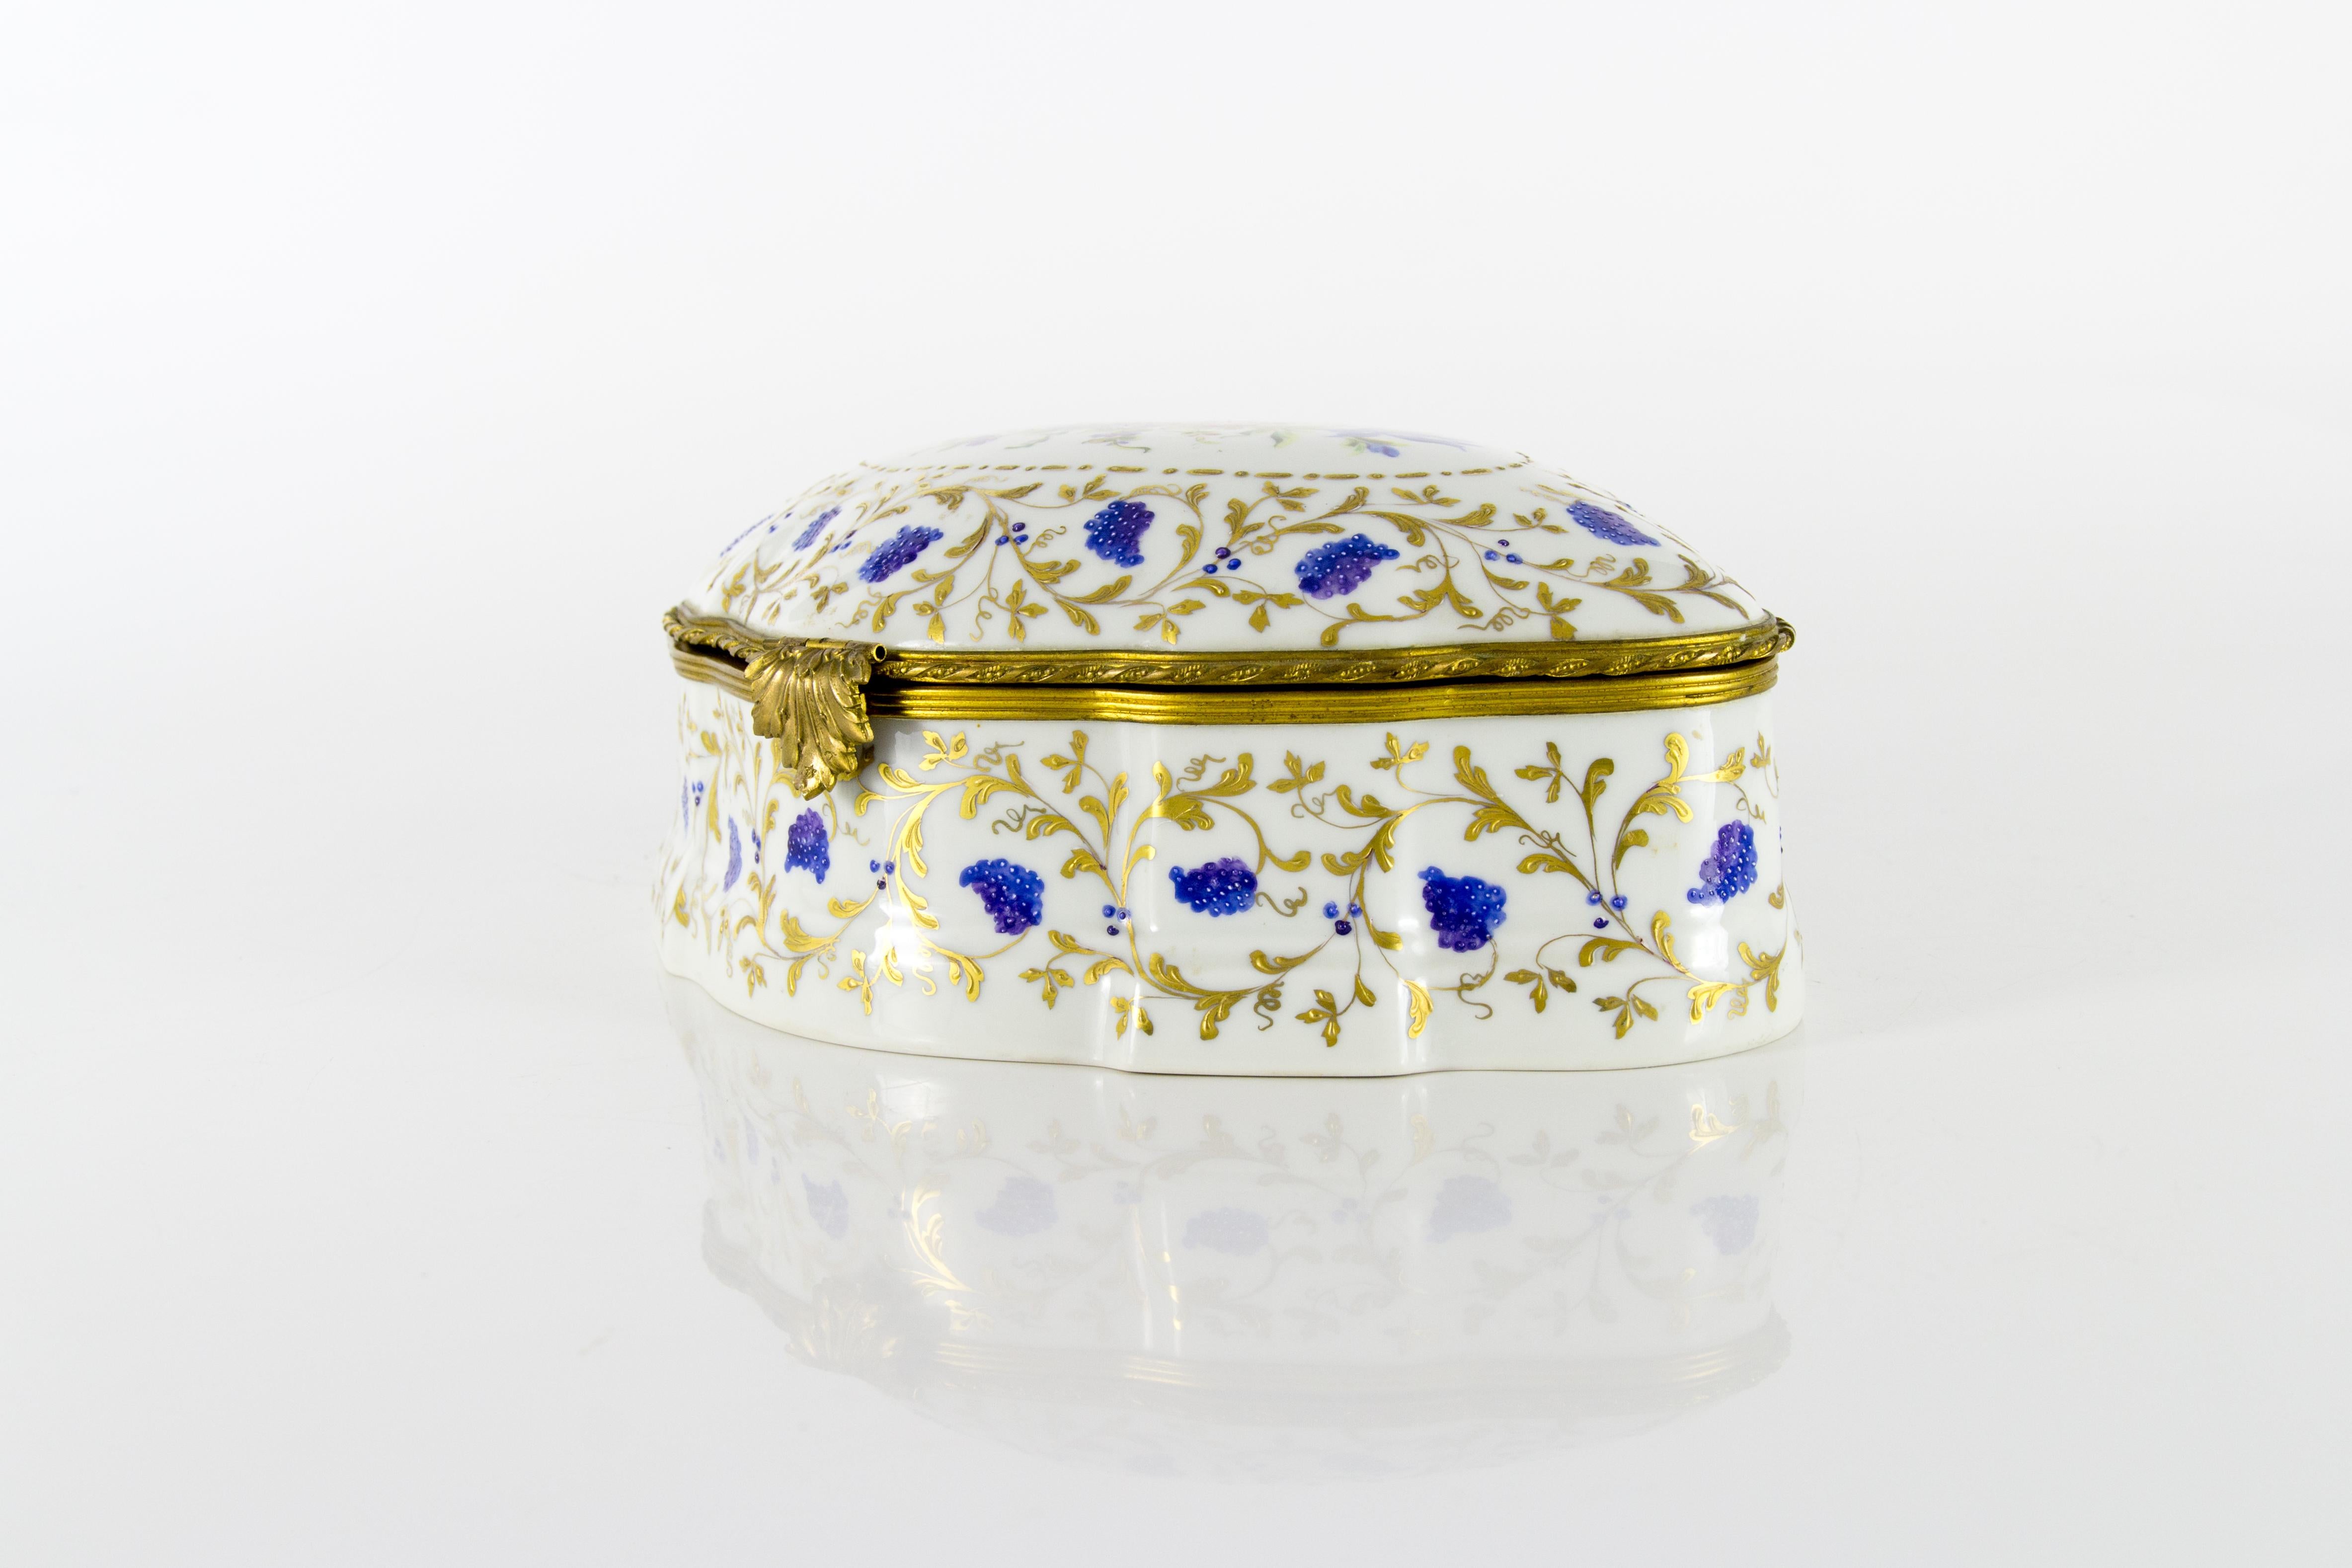 Late 20th Century Large Le Tallec Paris Porcelain Hand Painted Trinket or Jewelry Box, 1973